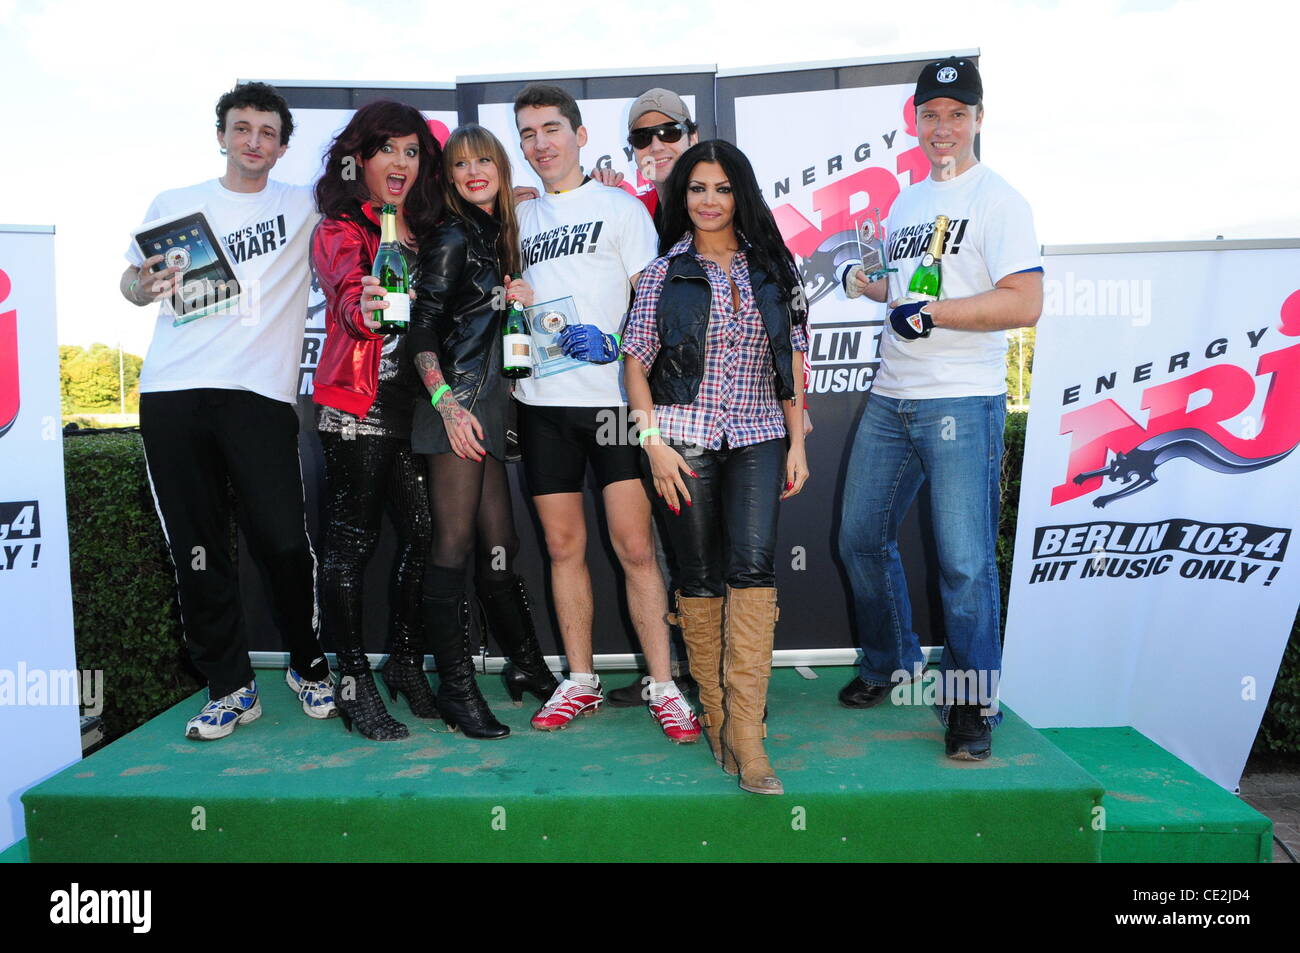 Winner with Nina Queer, Jennifer Rostock, Kader Loth at a Radio Energy  Berlin 103.4 competition at Trabrennbahn Mariendorf race track. Listeners  of the Berlin radio station had to pull a sulky with